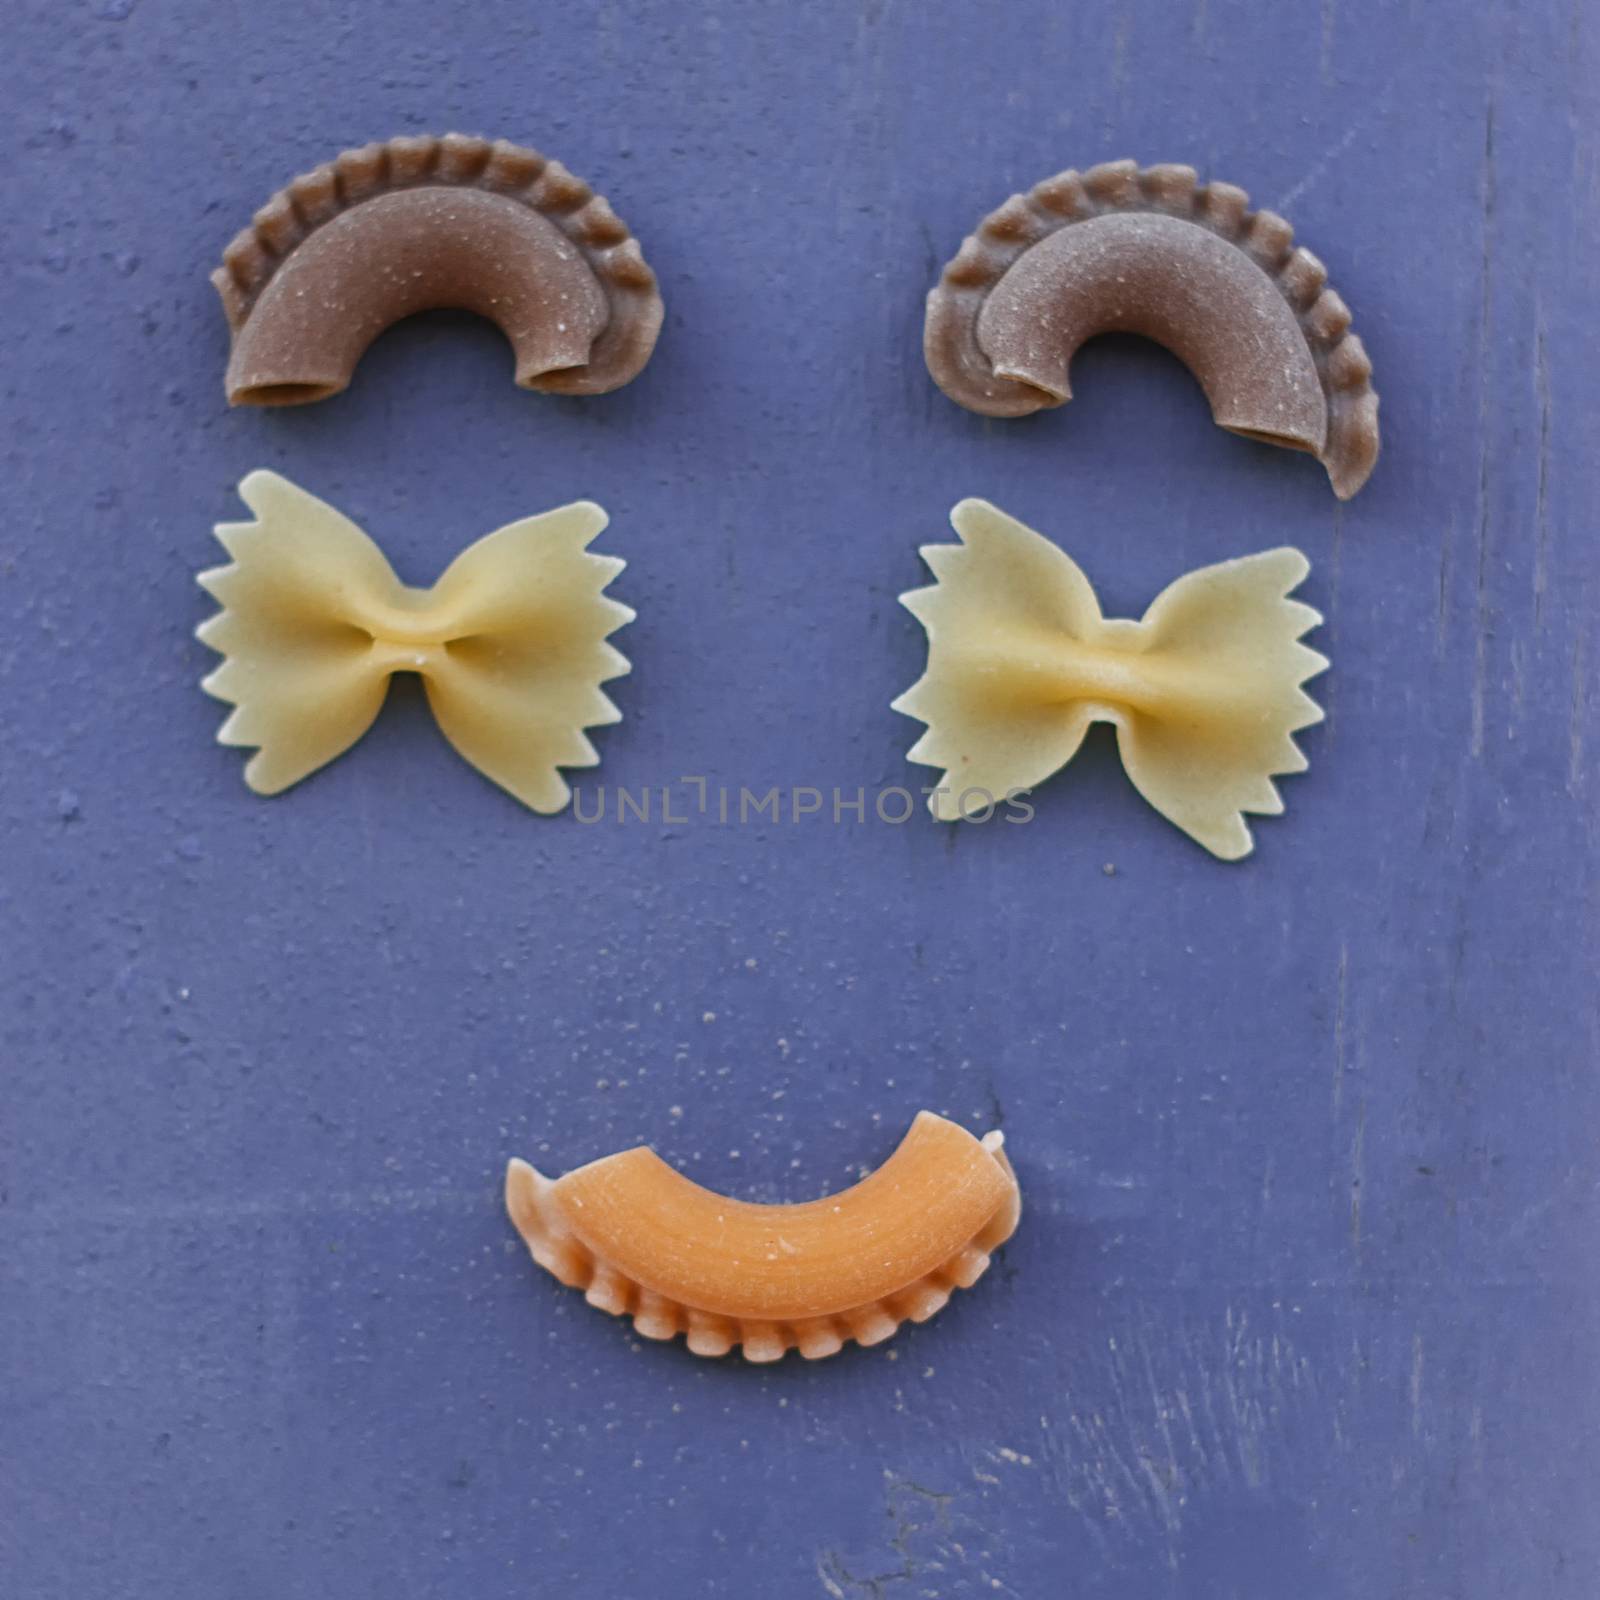 smiley face with raw pasta by victosha